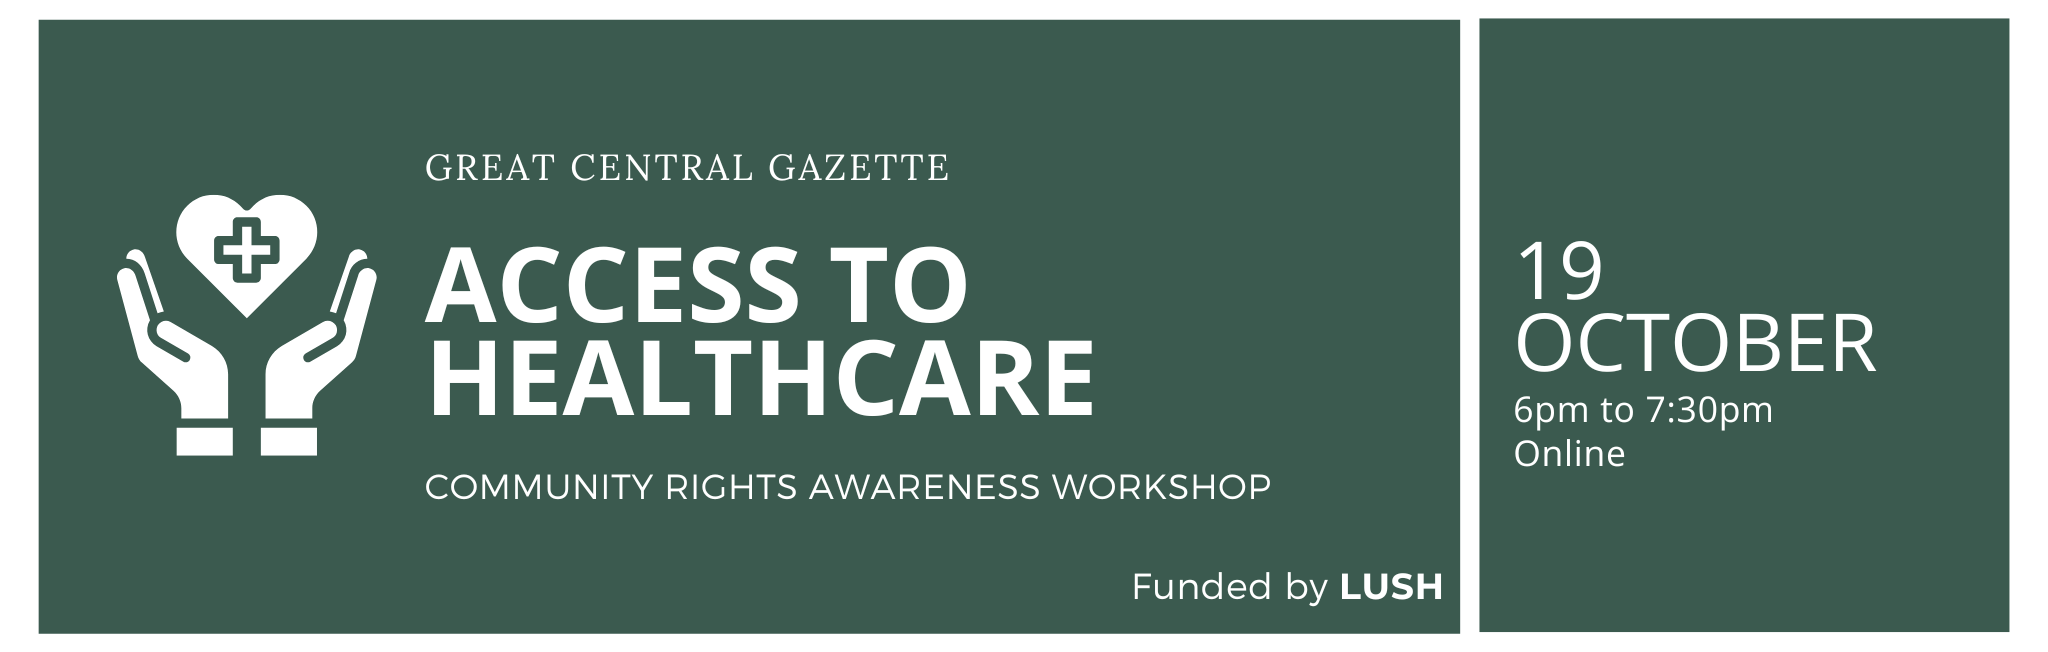 ACCESS TO HEALTHCARE COMMUNITY RIGHTS AWARENESS WORKSHOP GREAT CENTRAL GAZETTE 19  OCTOBER 6pm to 7:30pm Online Funded by LUSH